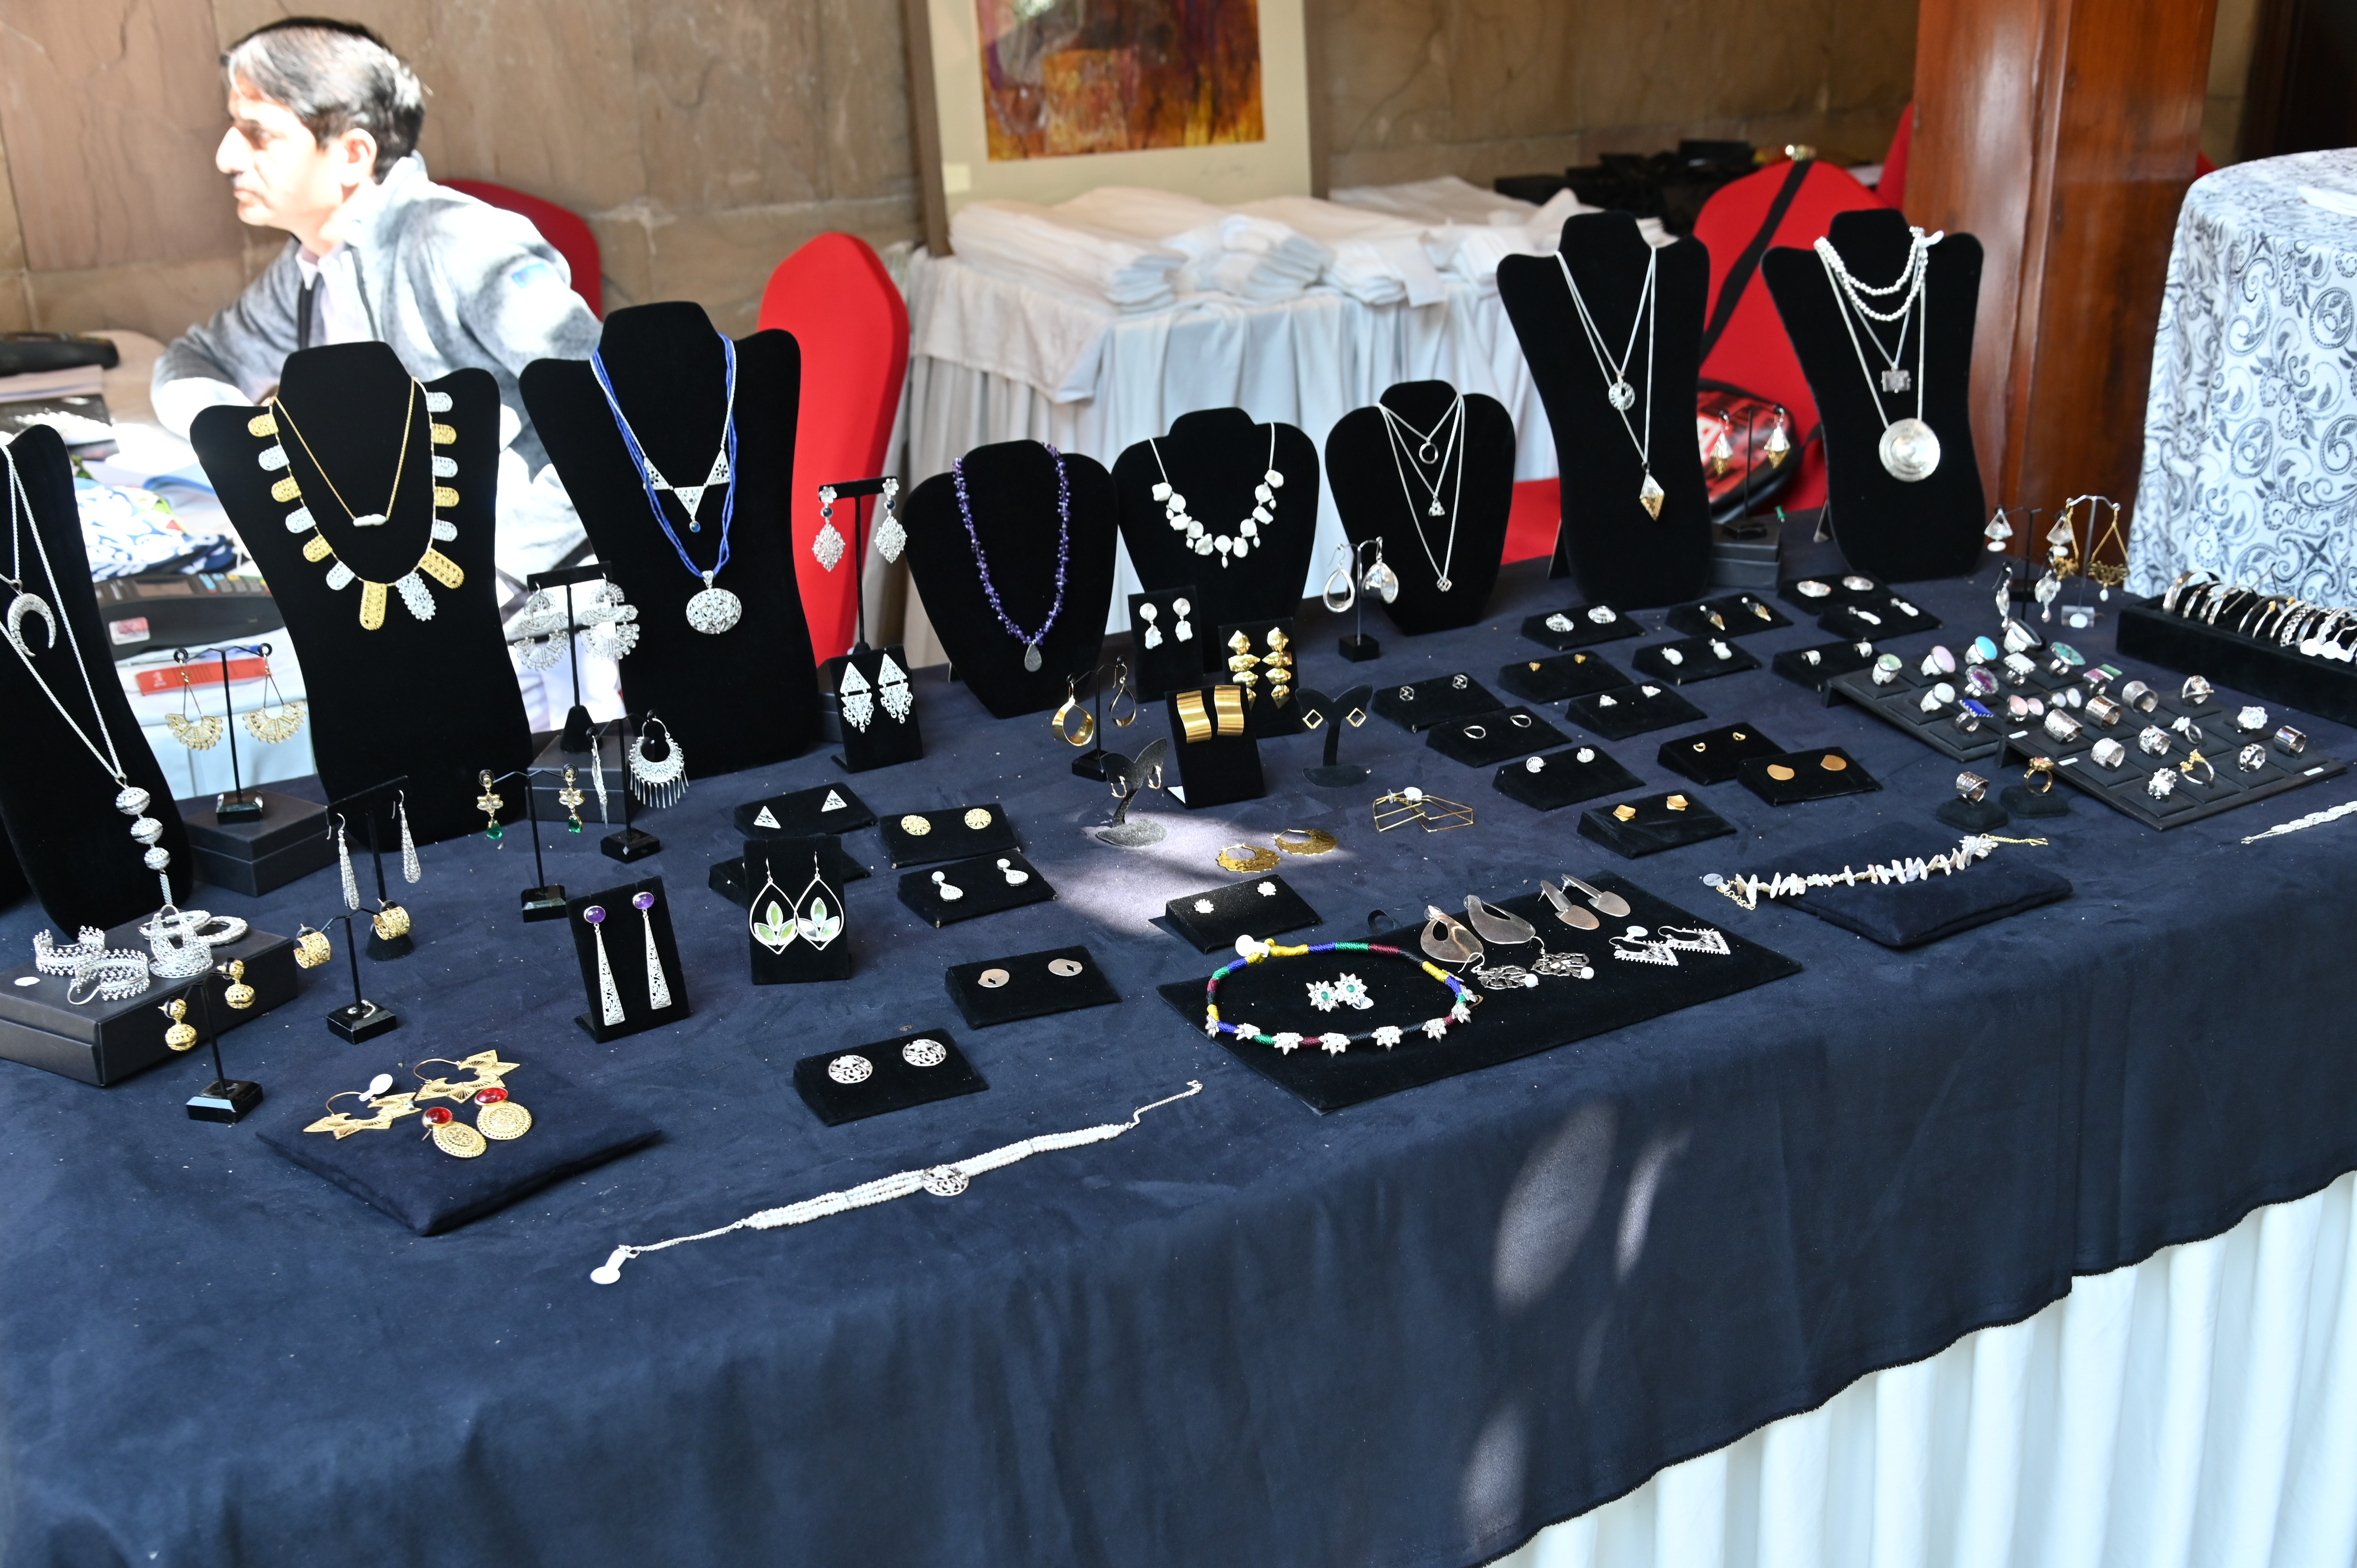 The Handmade jewelry displayed to be sold at the Crafts Festival